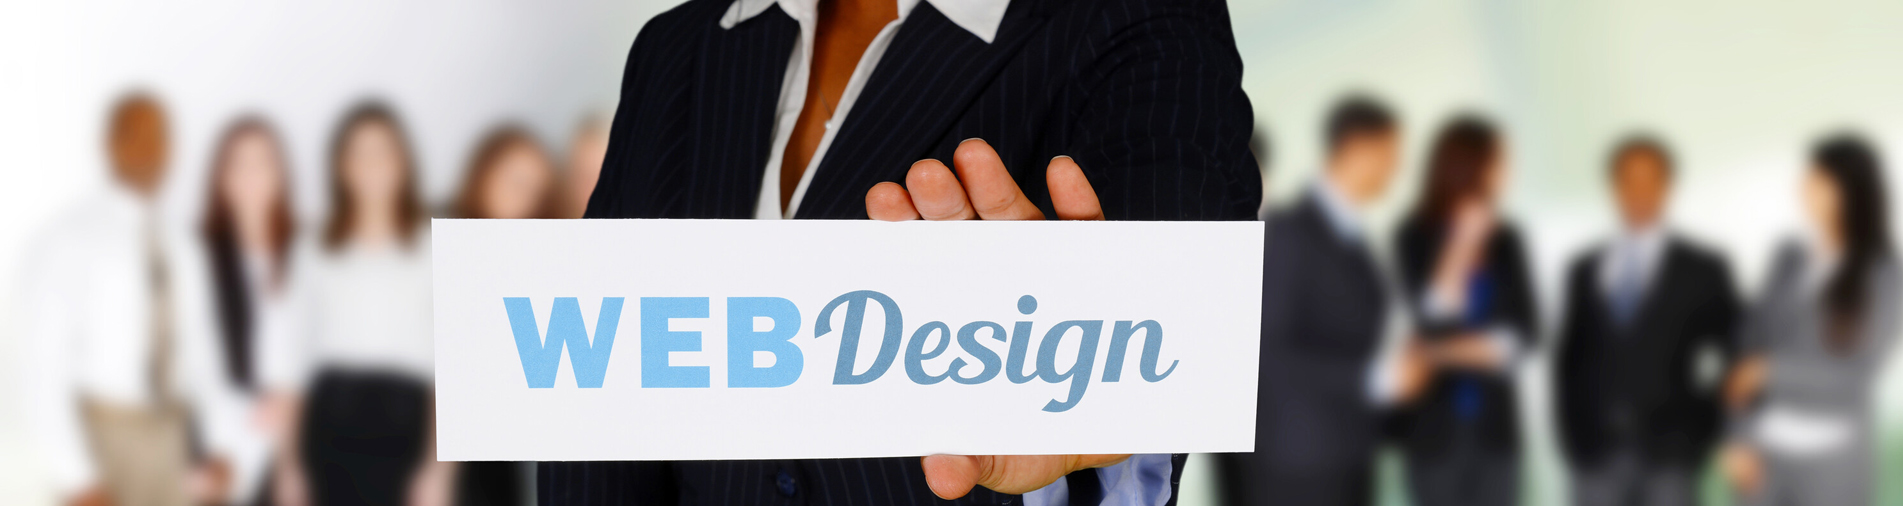 Website Design Impacts the Marketing Strategy of a Business